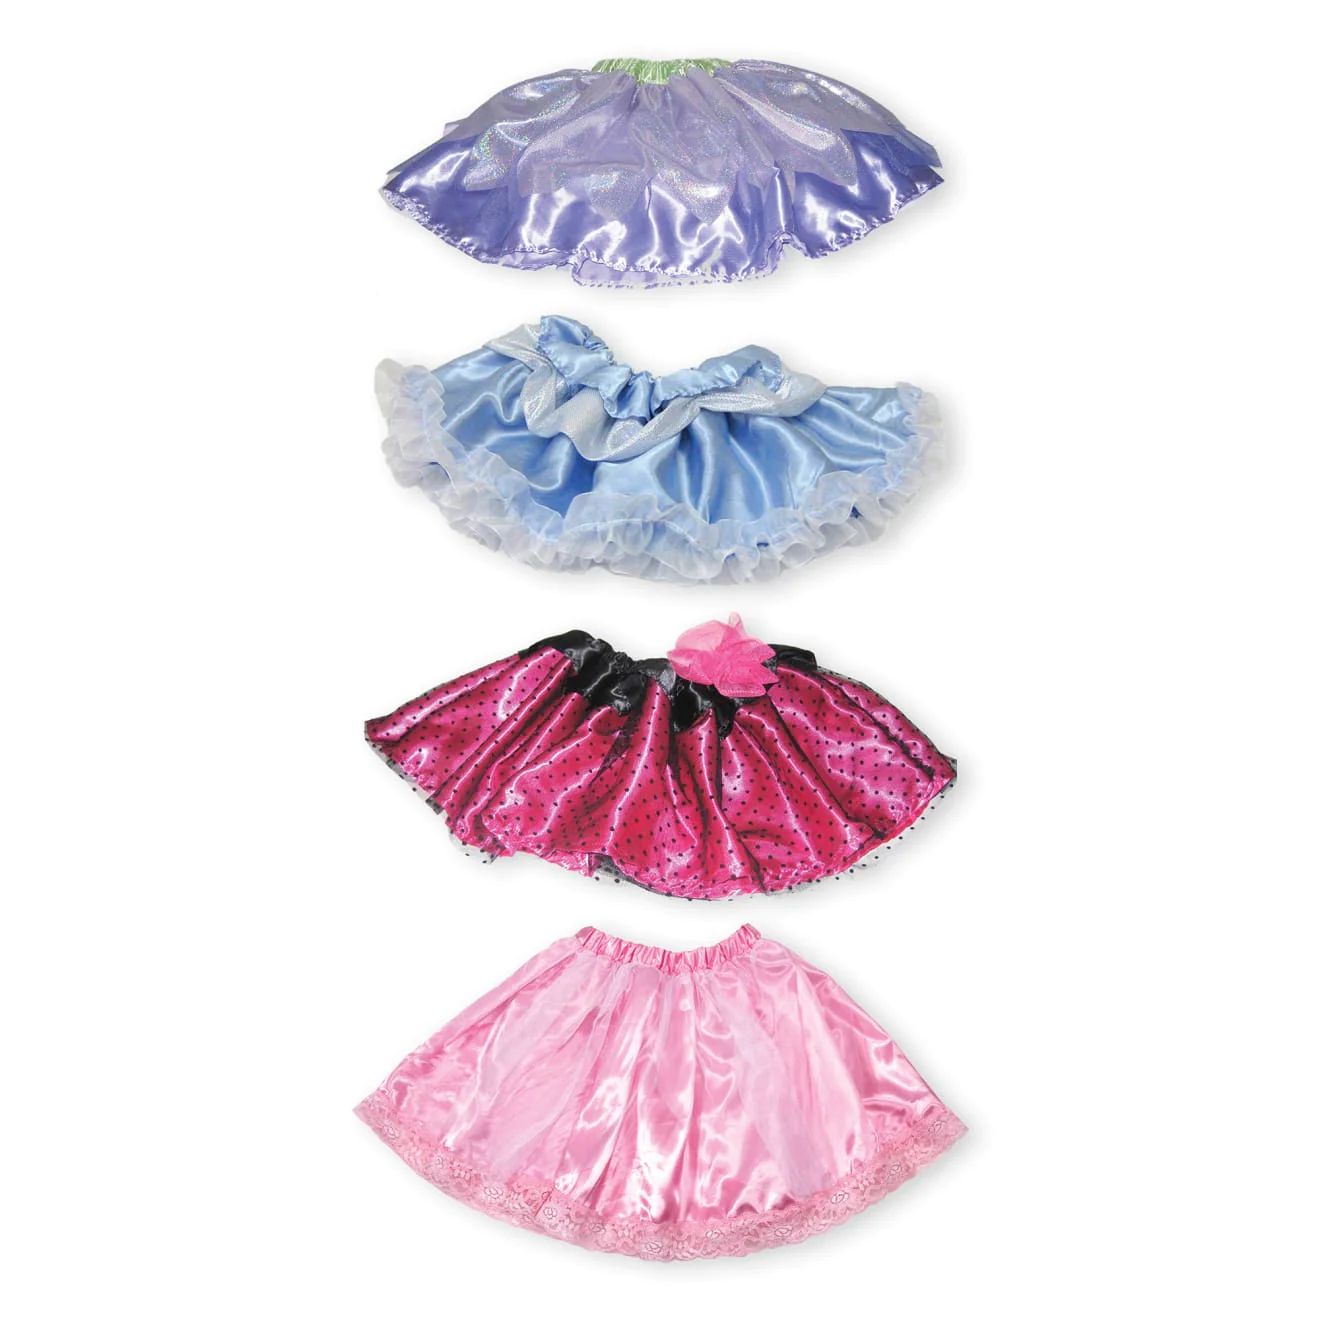 Role Play Collection - Goodie Tutus | Melissa and Doug